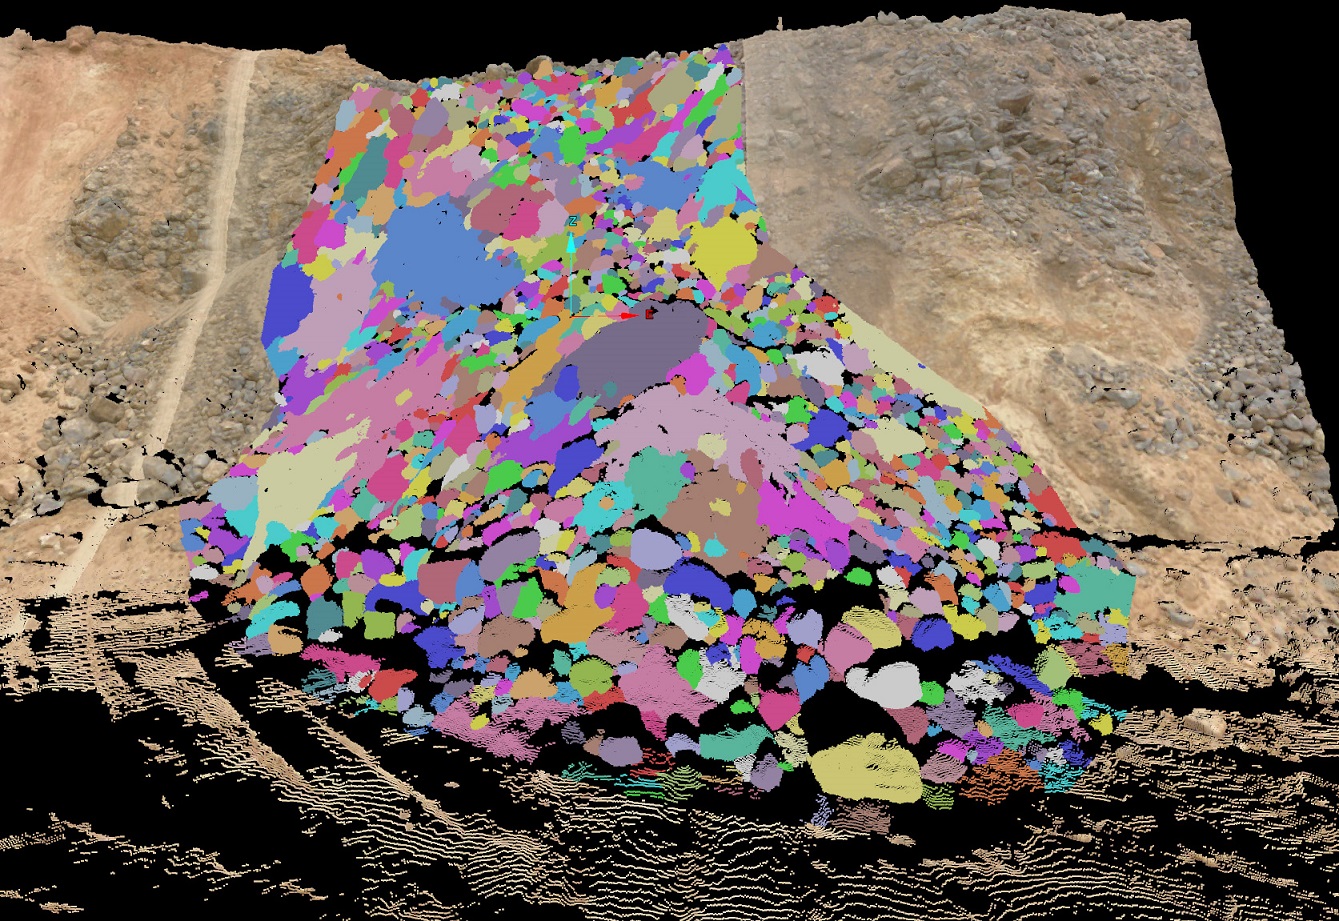 The new tool enables rapid assessment of the condition of blasted rock